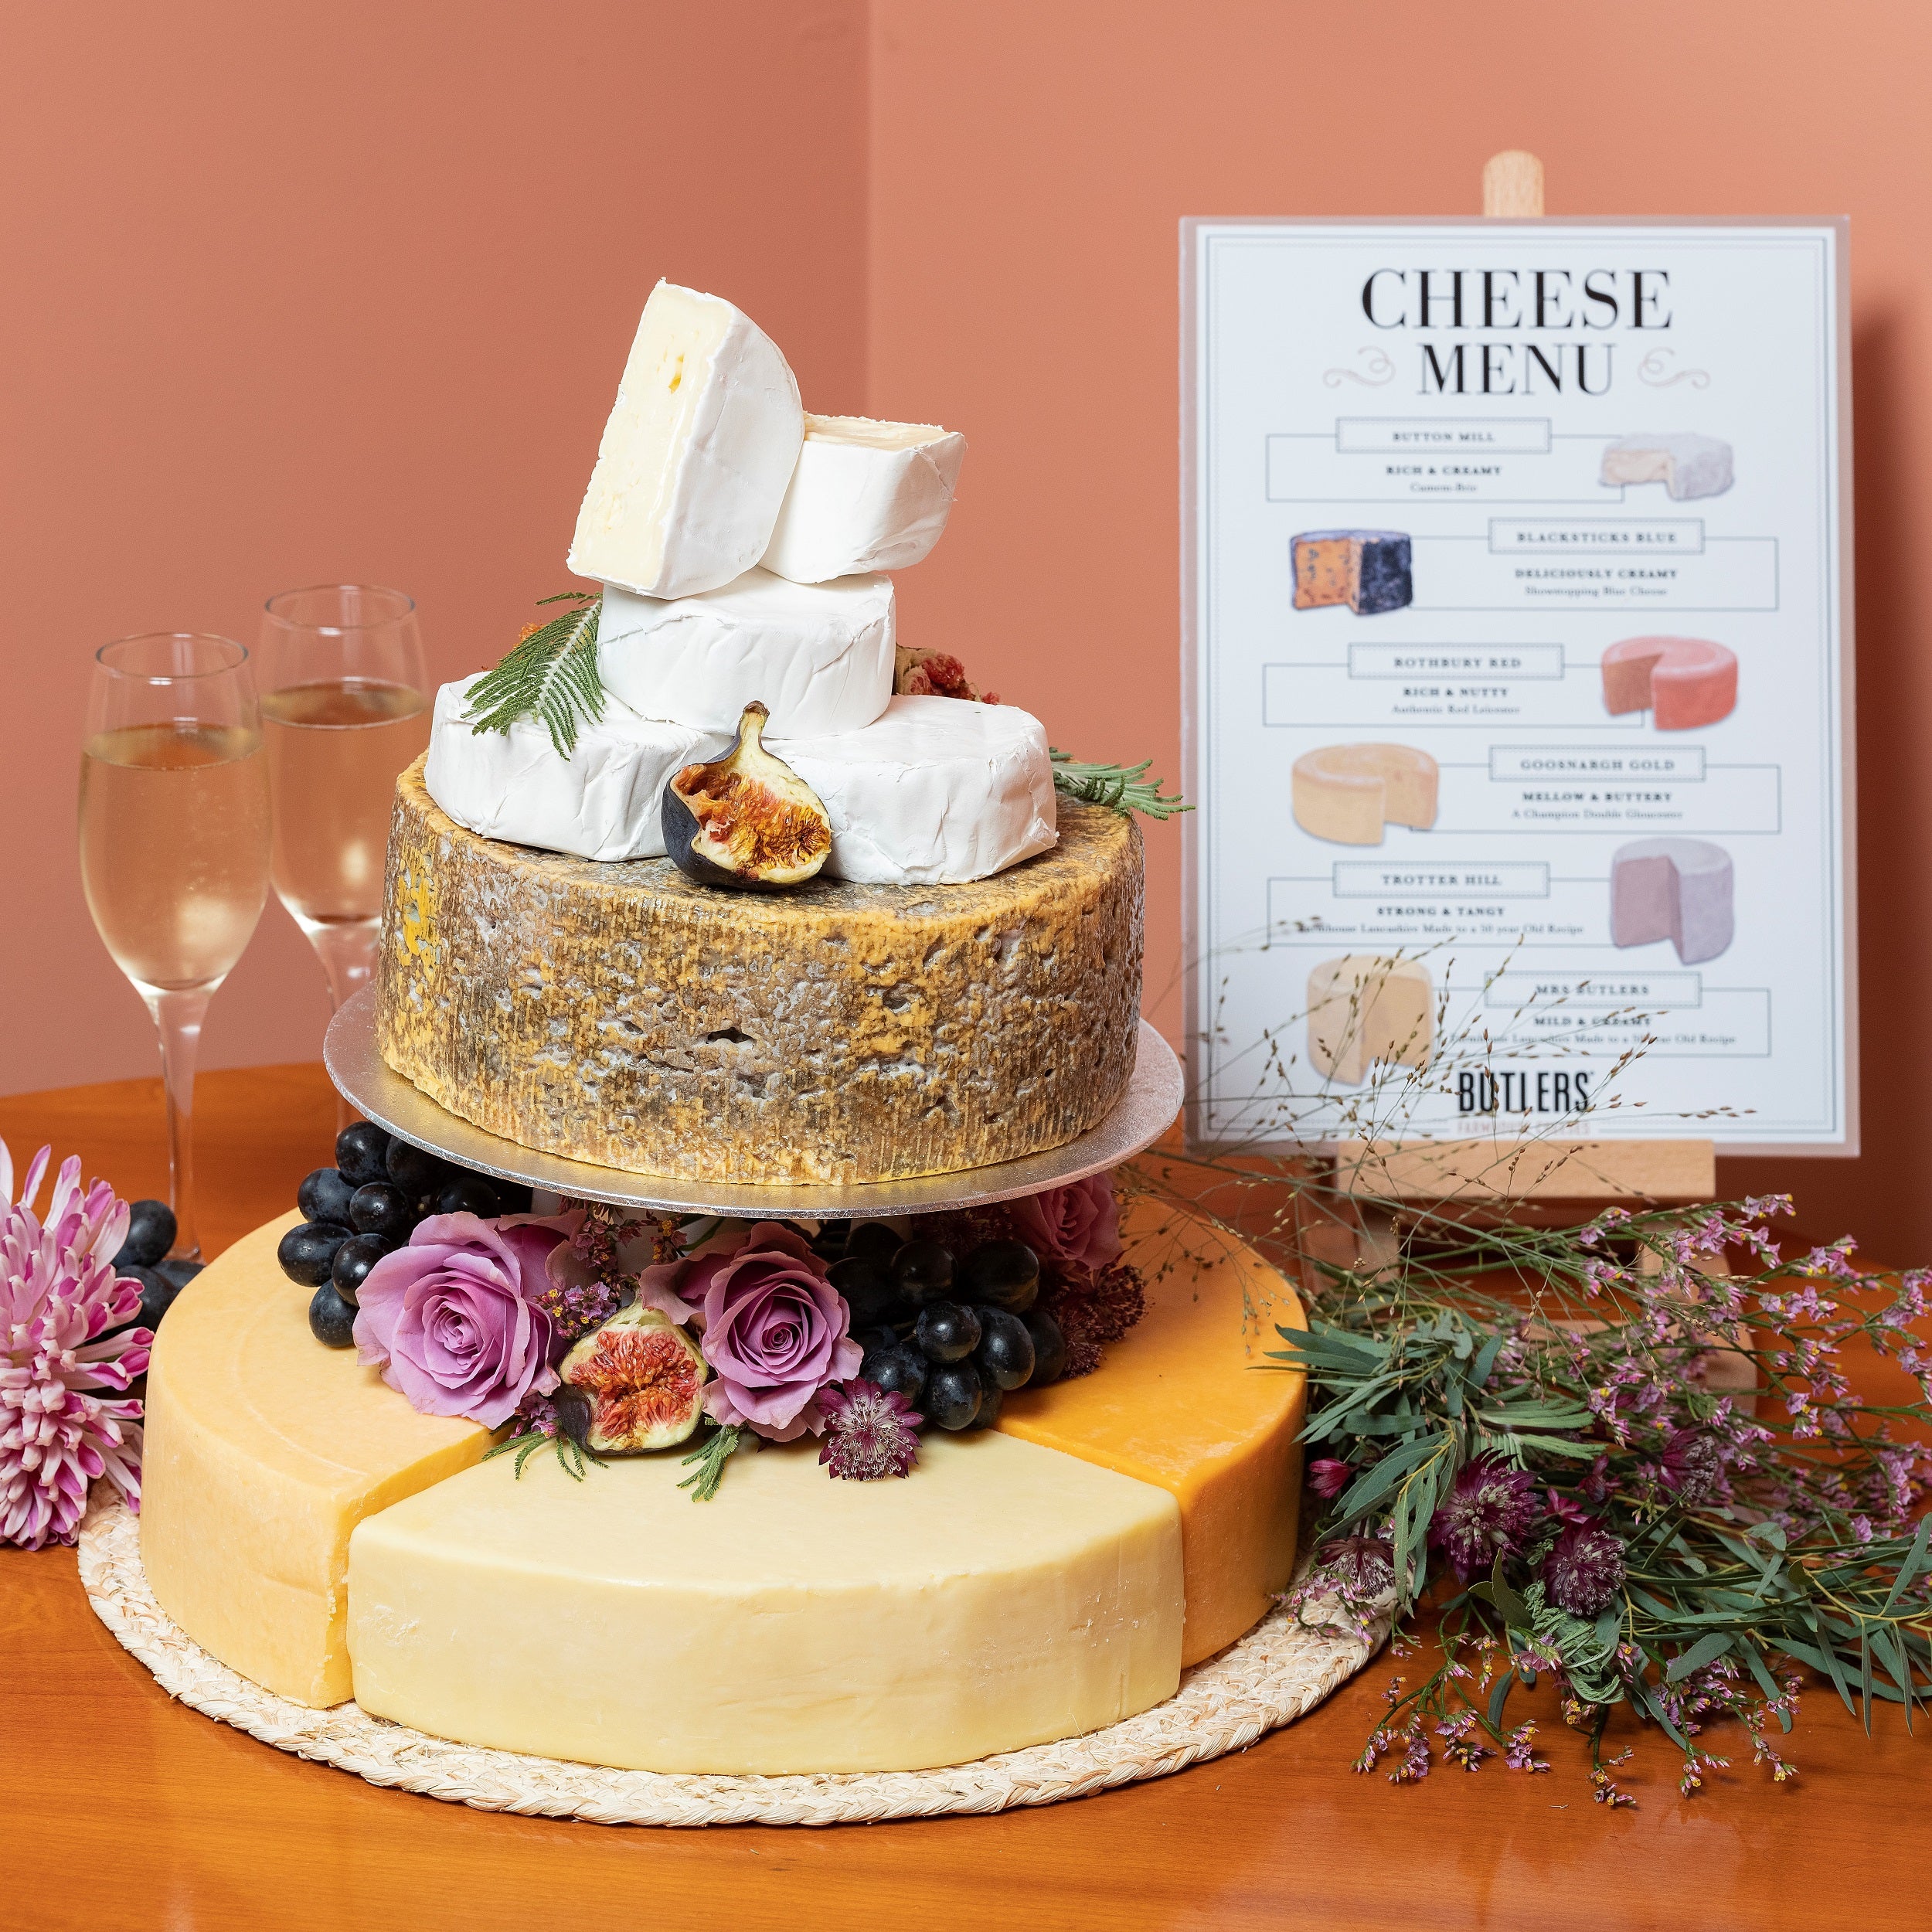 Large cheese wedding cake or cheese celebration cake. A tower of artisan Lancashire cheese from our dairy, with a cheese menu for your guests.